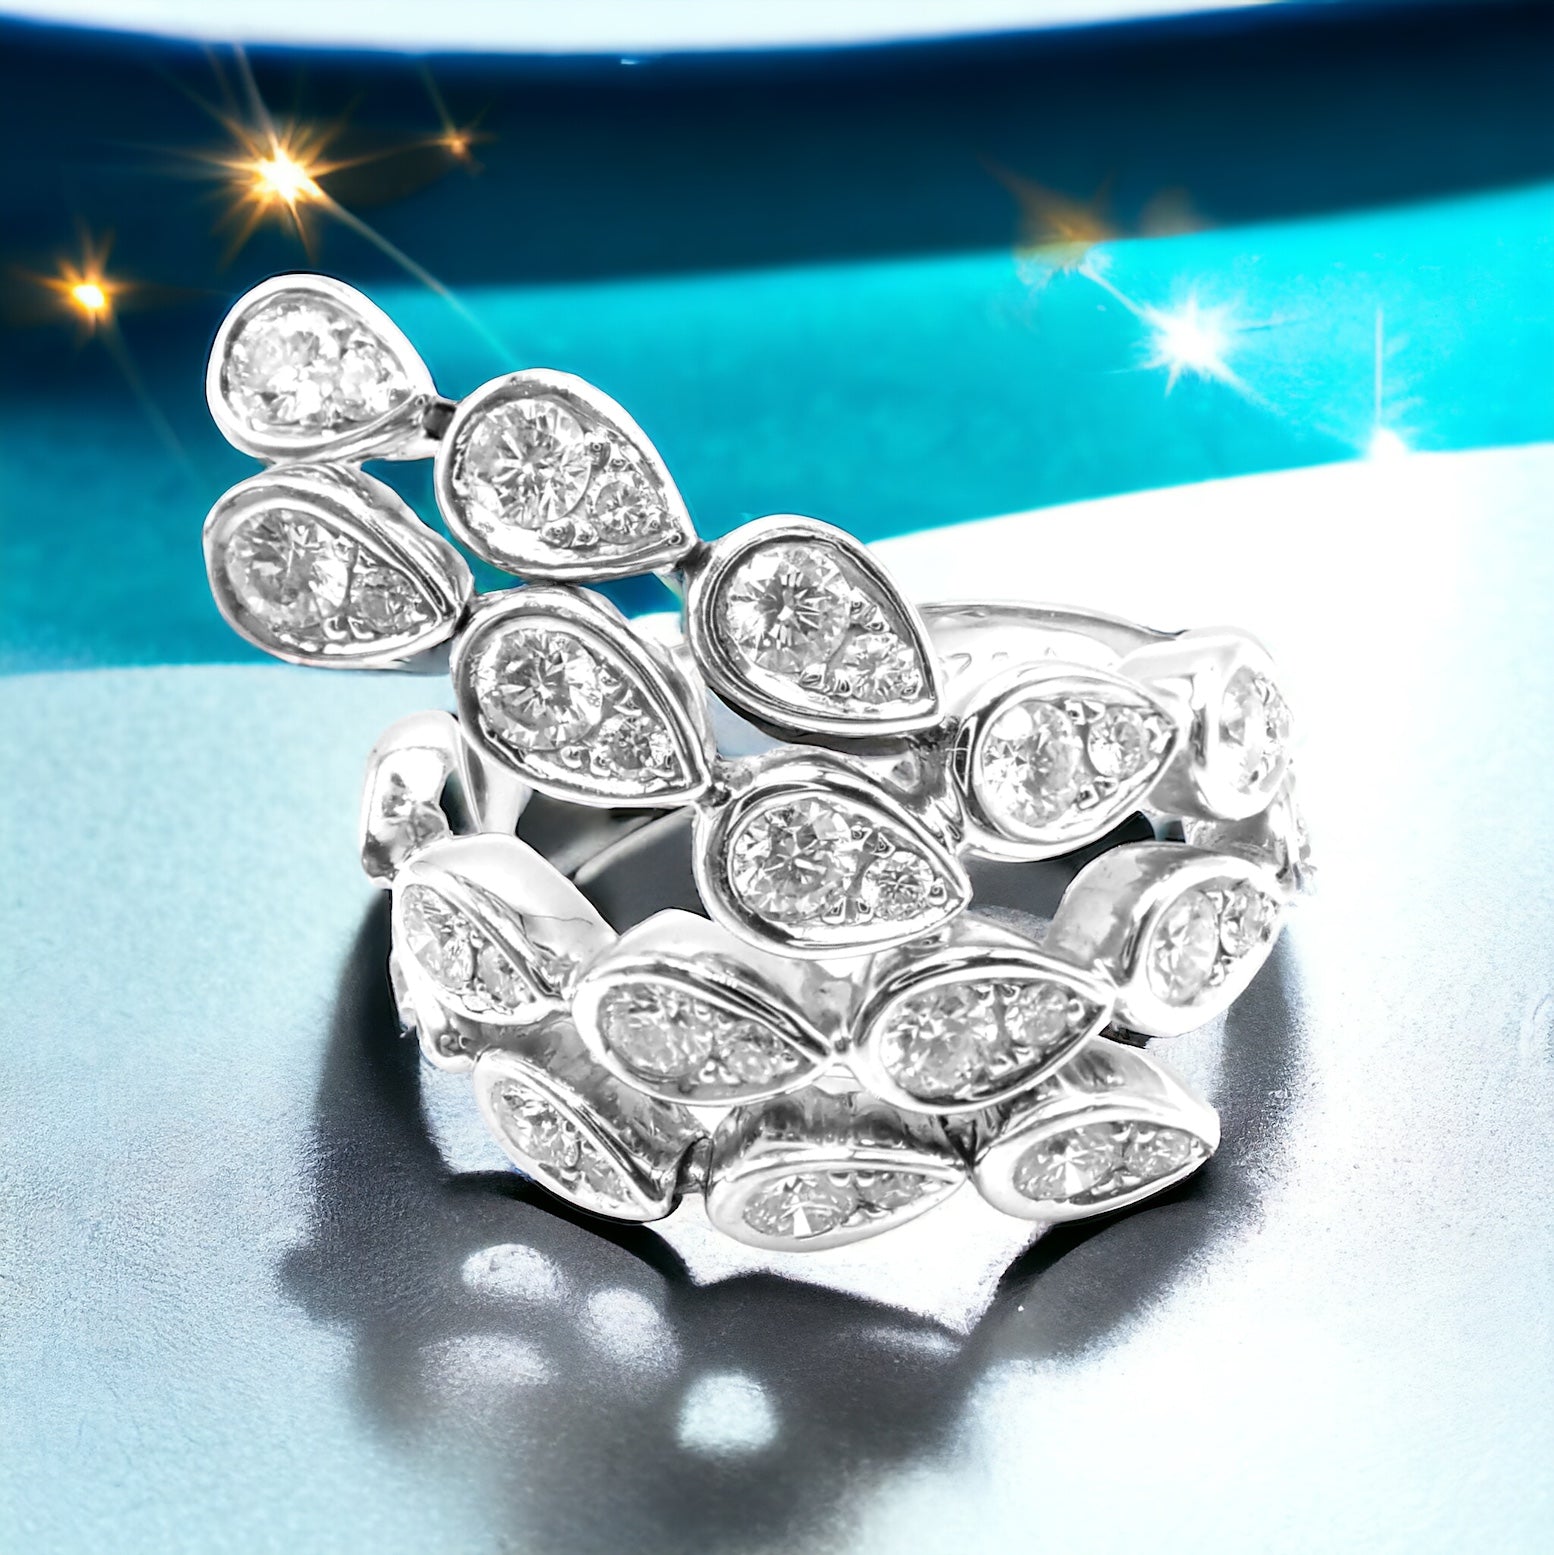 Piaget Jewelry & Watches:Fine Jewelry:Rings Authentic! Piaget Magic Reflection 18k White Gold Diamond Flexible Ring